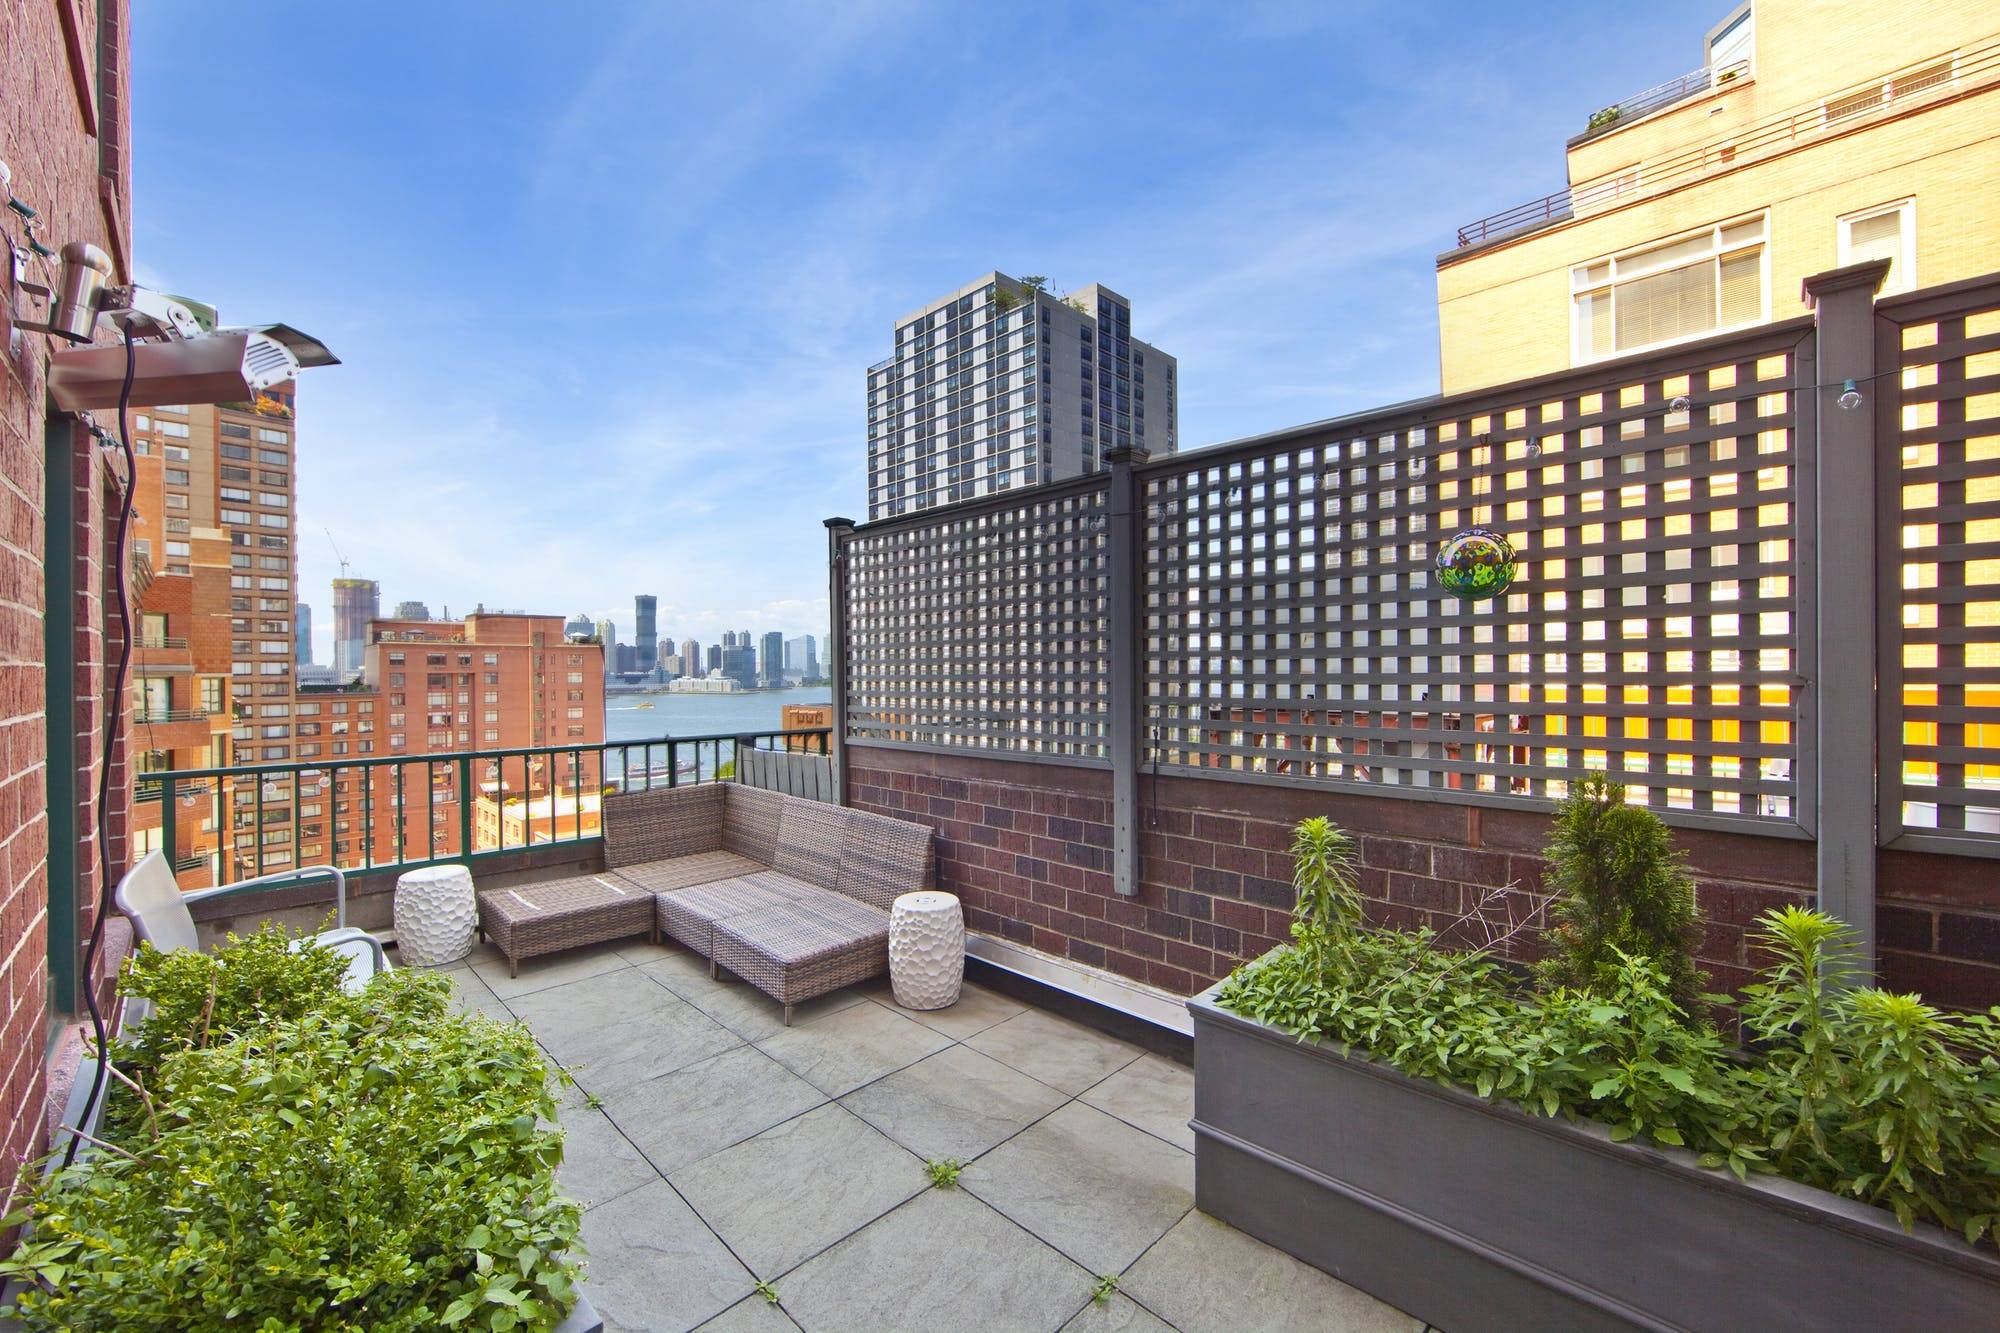 HUGE PRIVATE TERRACE ! ! The only 2 bedroom 2 bathroom home with a private, west facing terrace is now available in 225 Rector Place, the prime Battery Park condominium ...